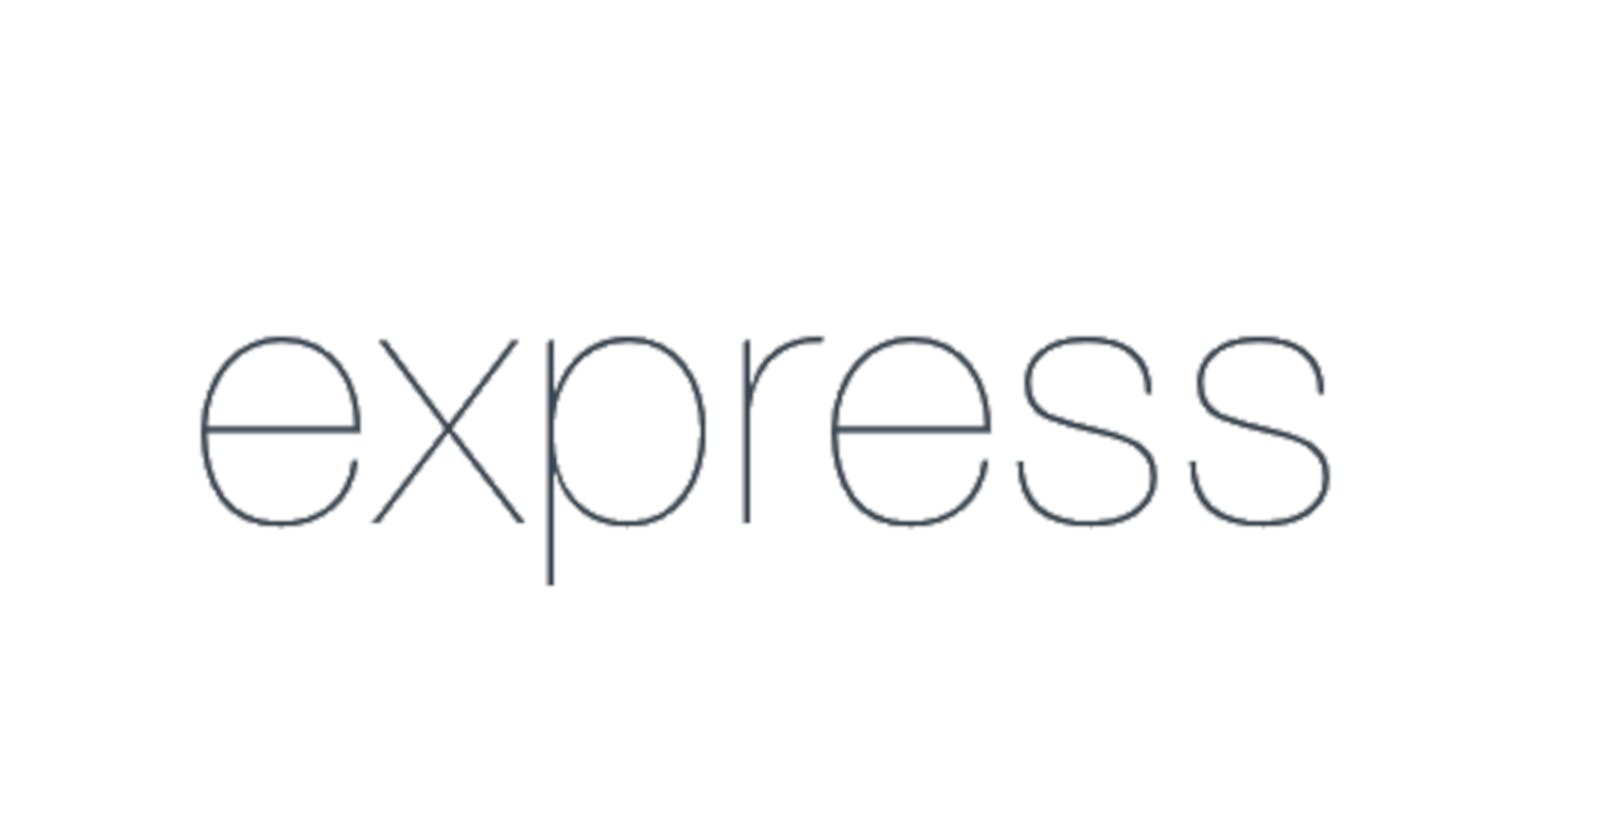 How To Redirect The User To Another Page When Using Express